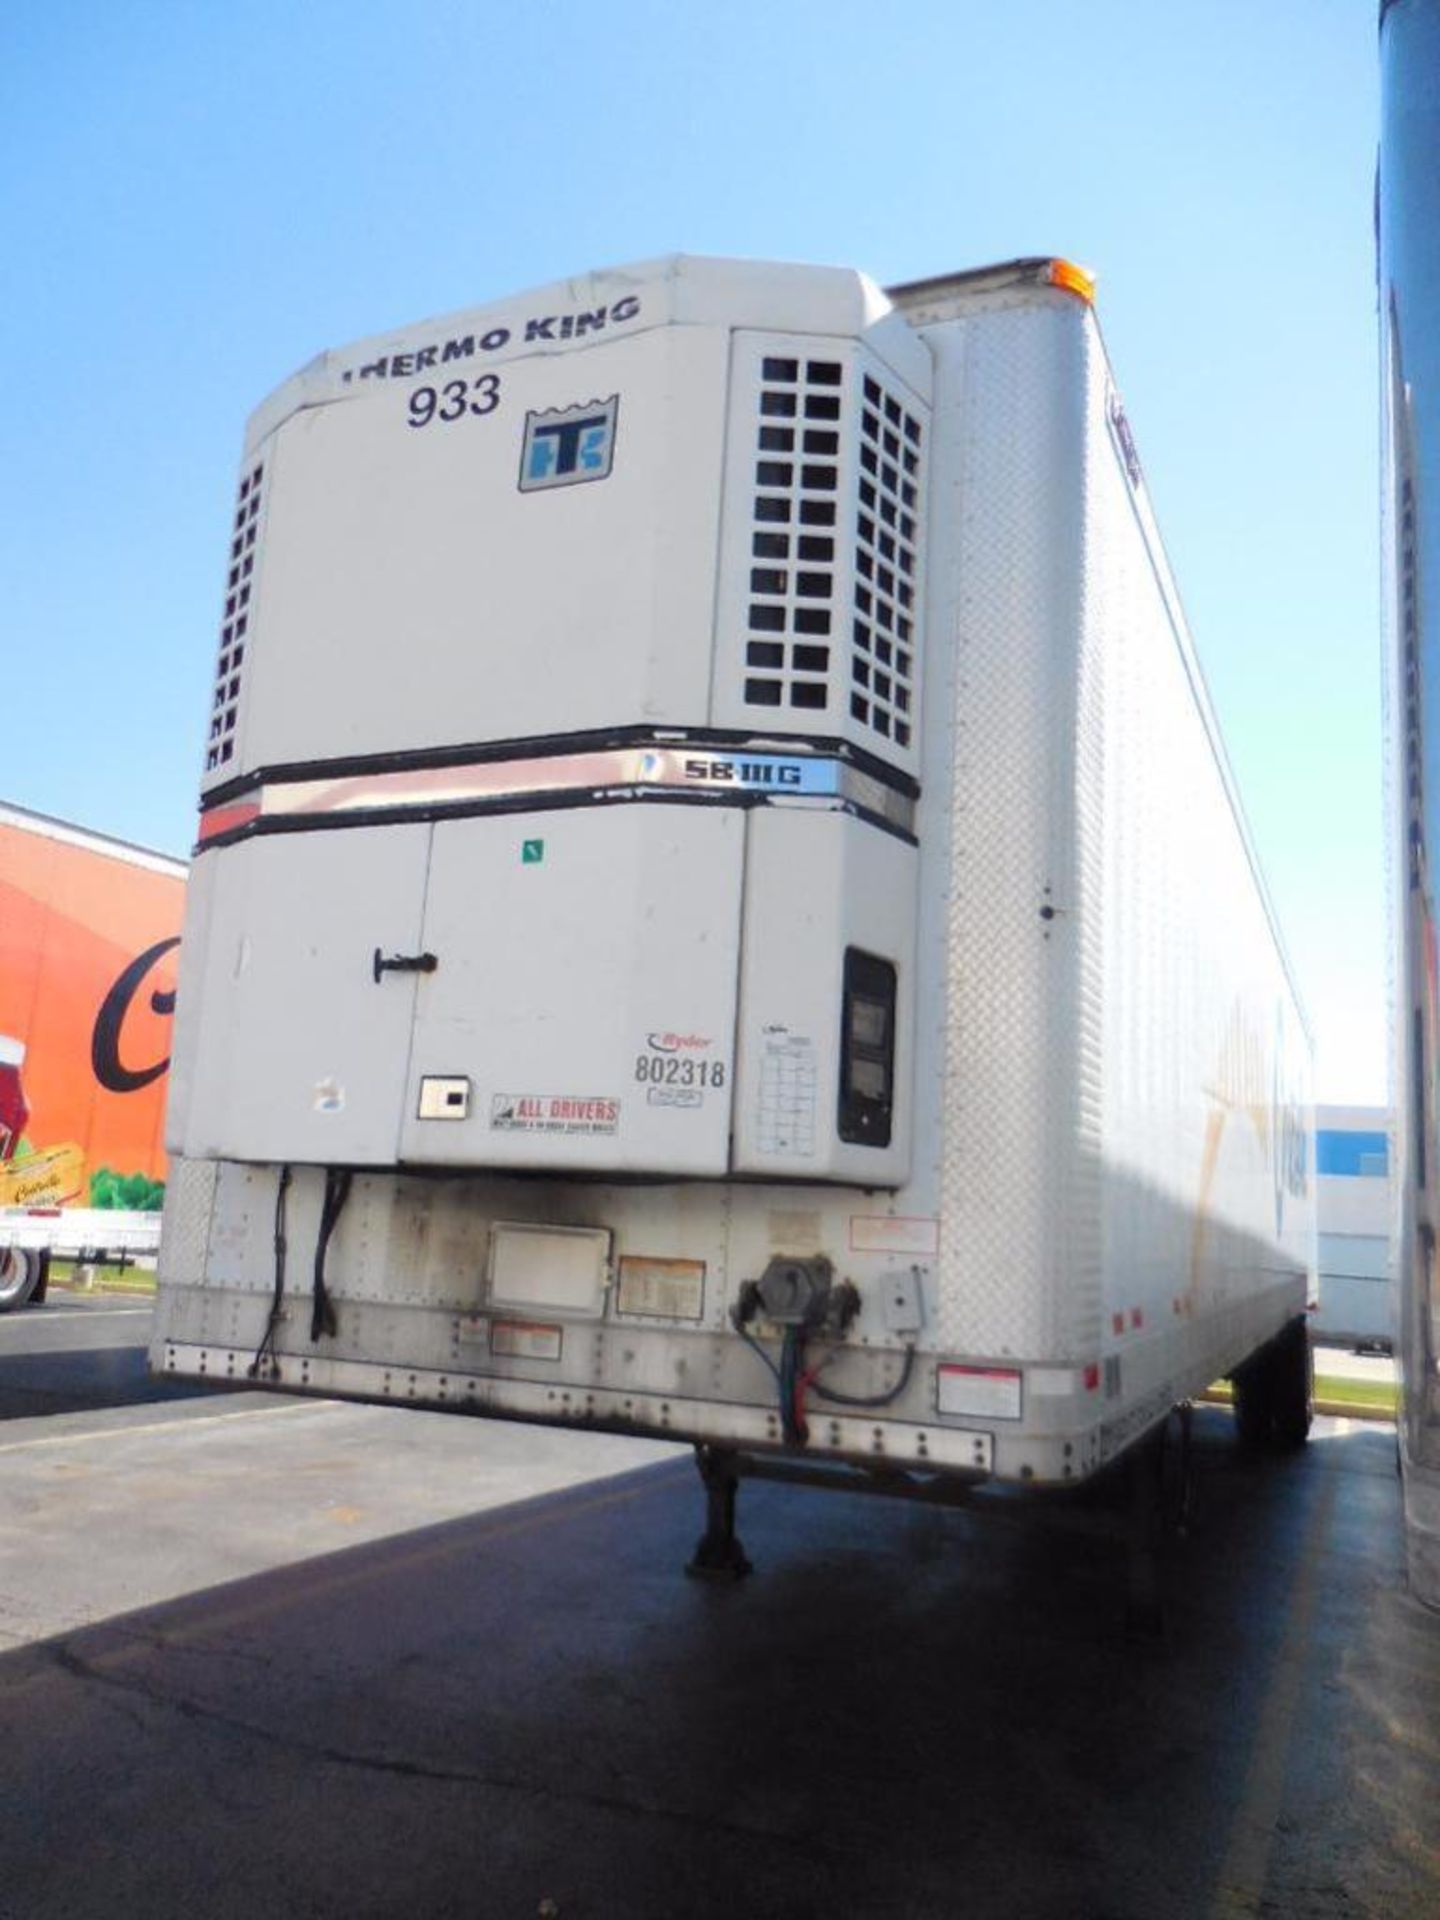 2003 Great Dane 48' Refrigerated Trailer, VIN # 1GRAA96233B032602, Unit 933 - Image 3 of 19